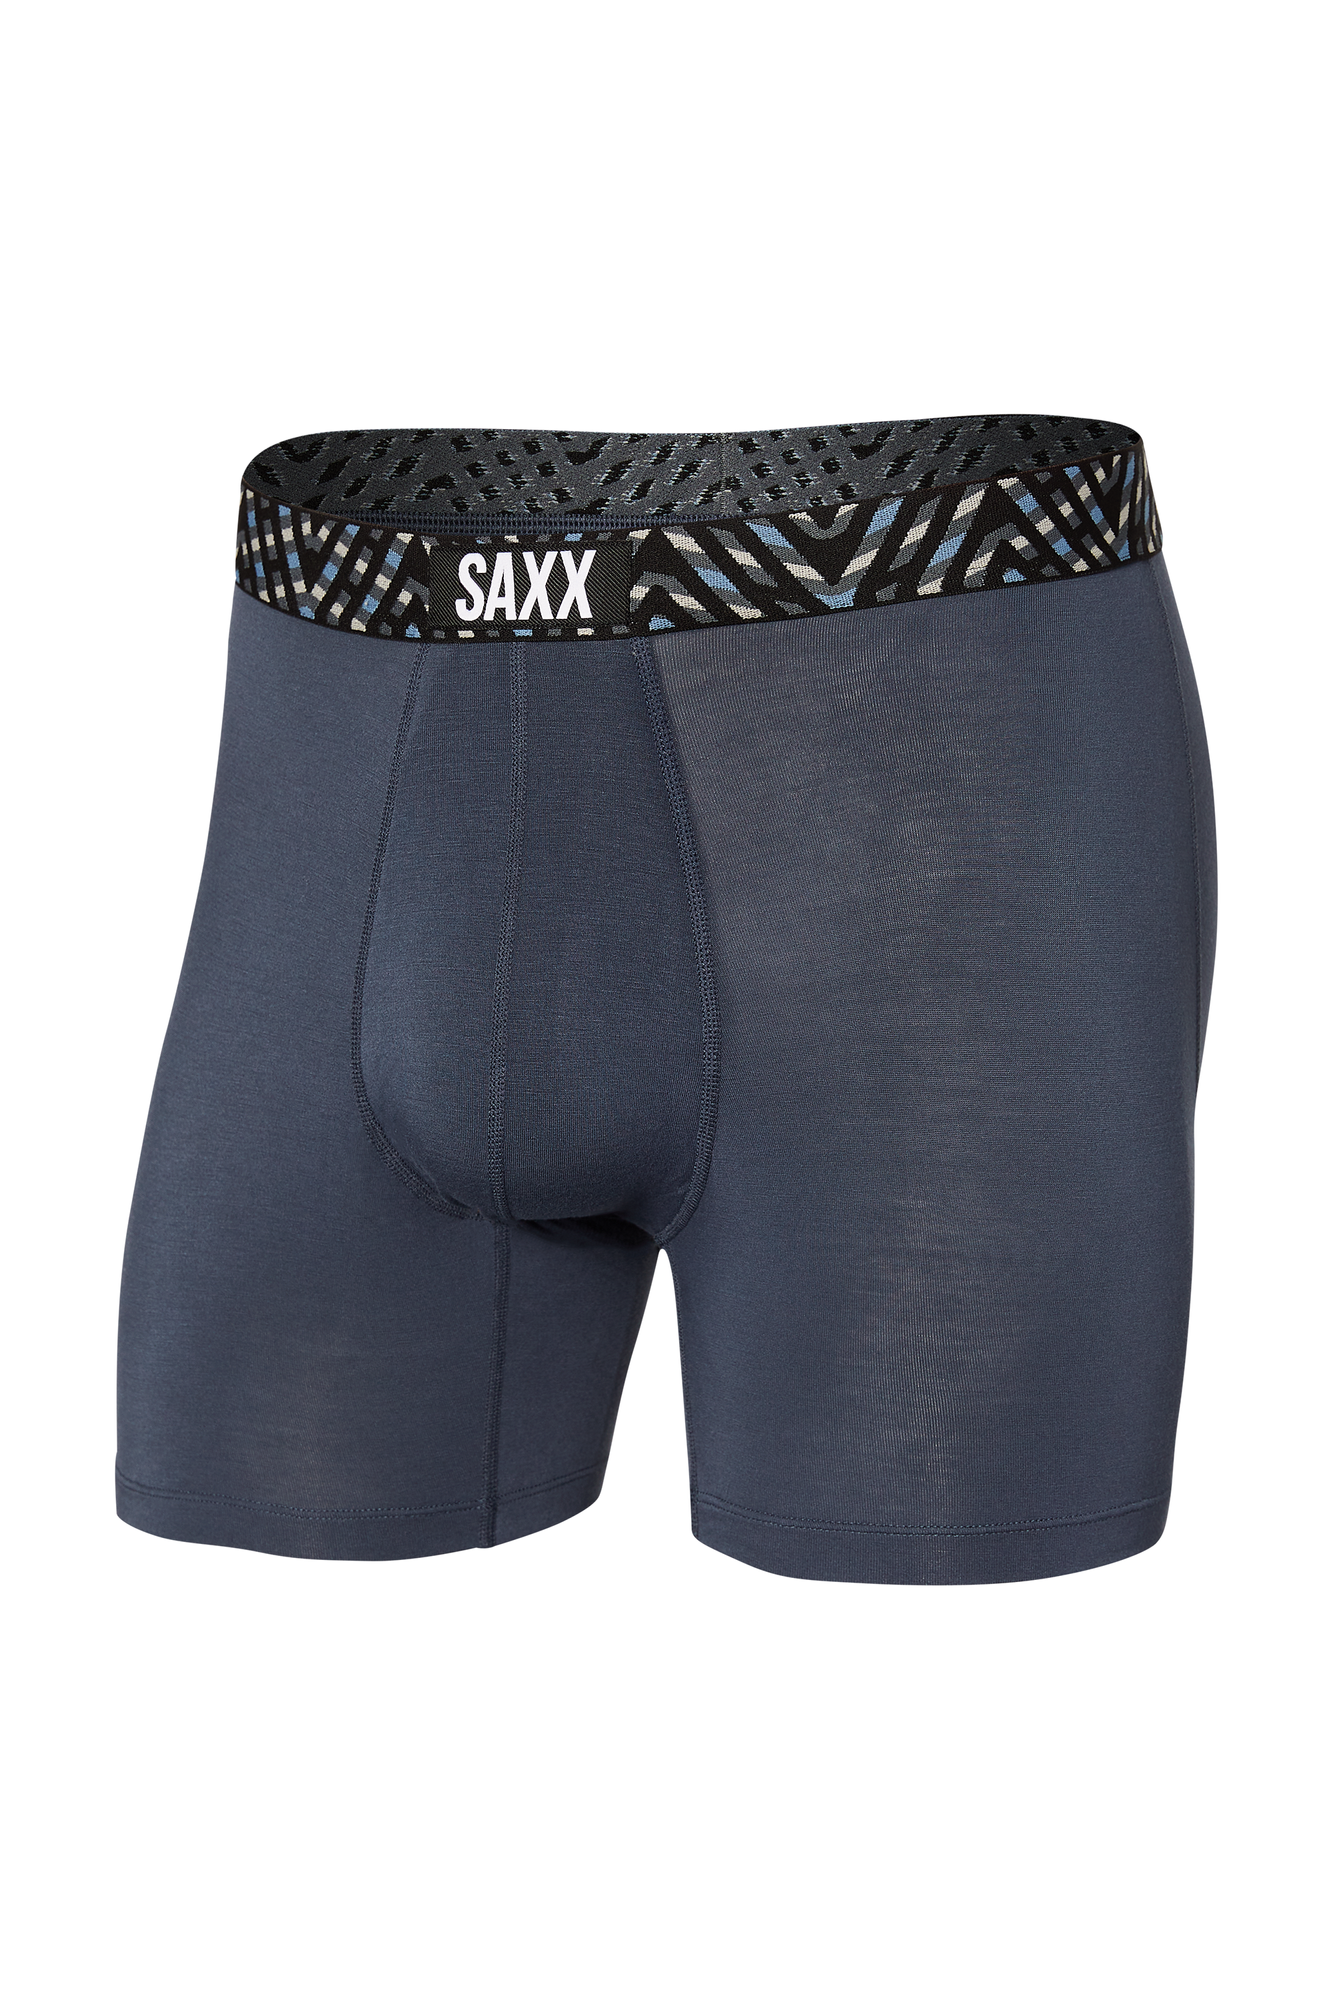 Men's Boxer Briefs With A Pouch  Anti-Chafing Boxers, 5x Softer